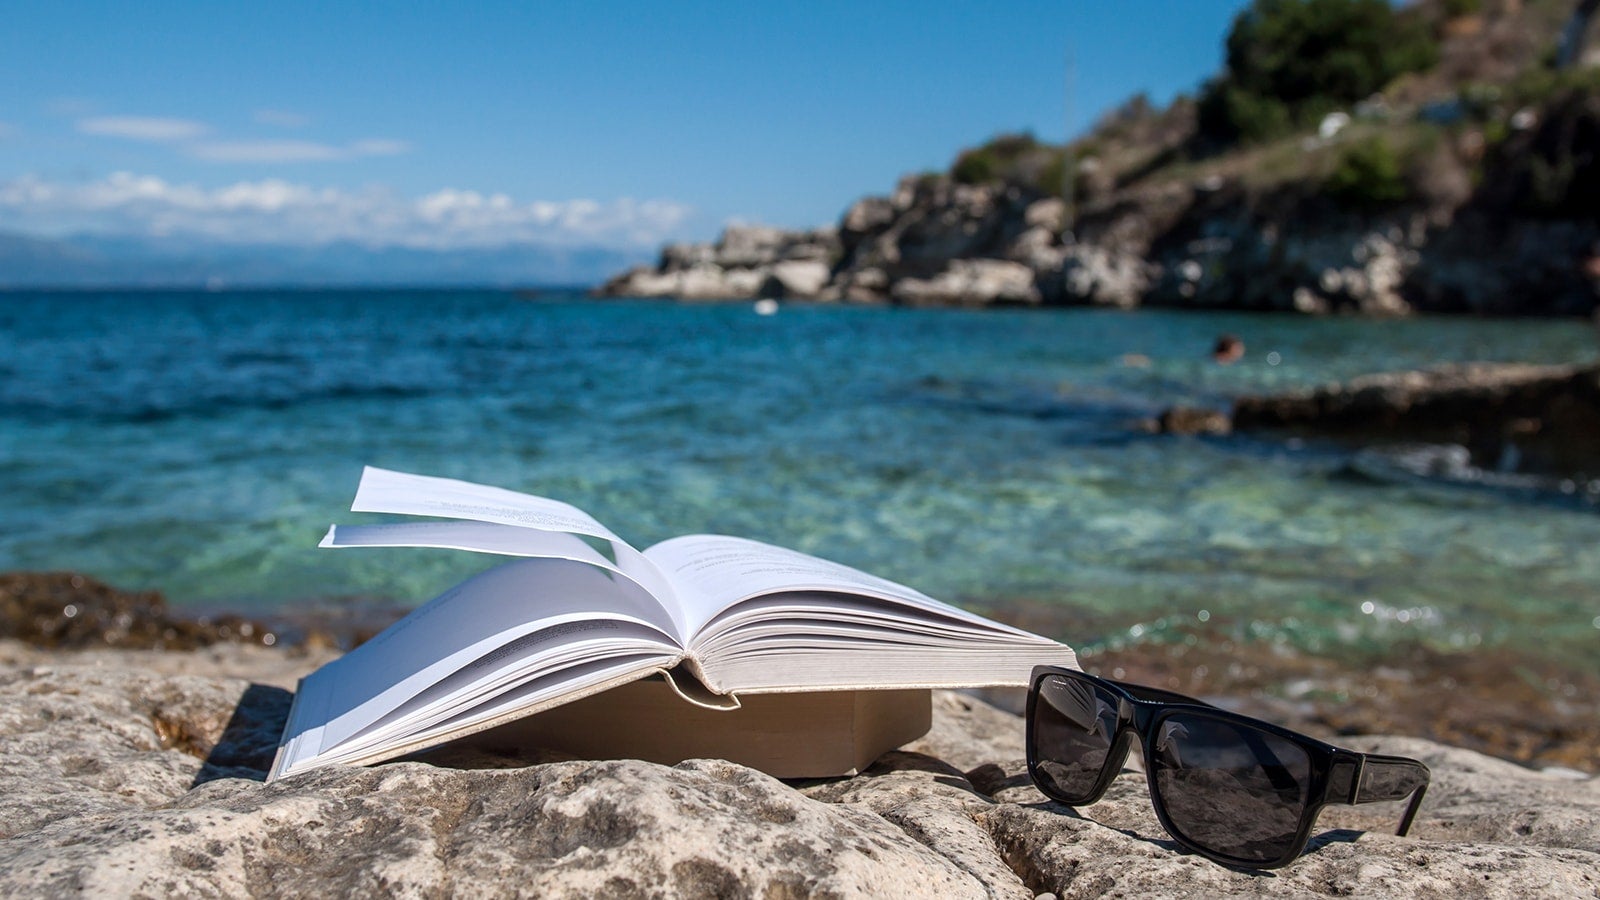 Book open next to sunglasses in front of blue sea